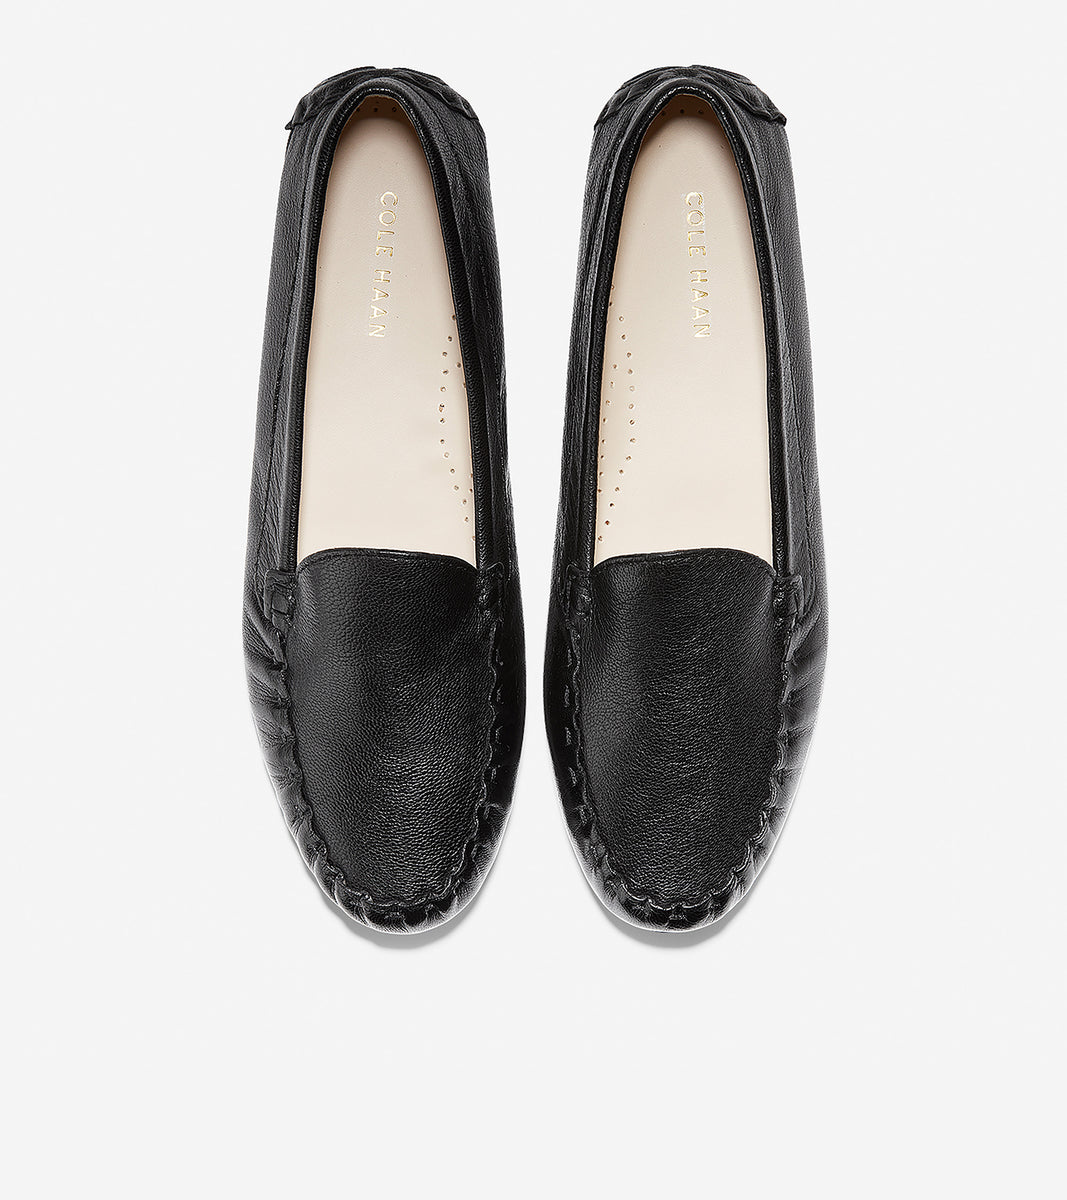 ColeHaan-Evelyn Driver-w13570-Black Leather